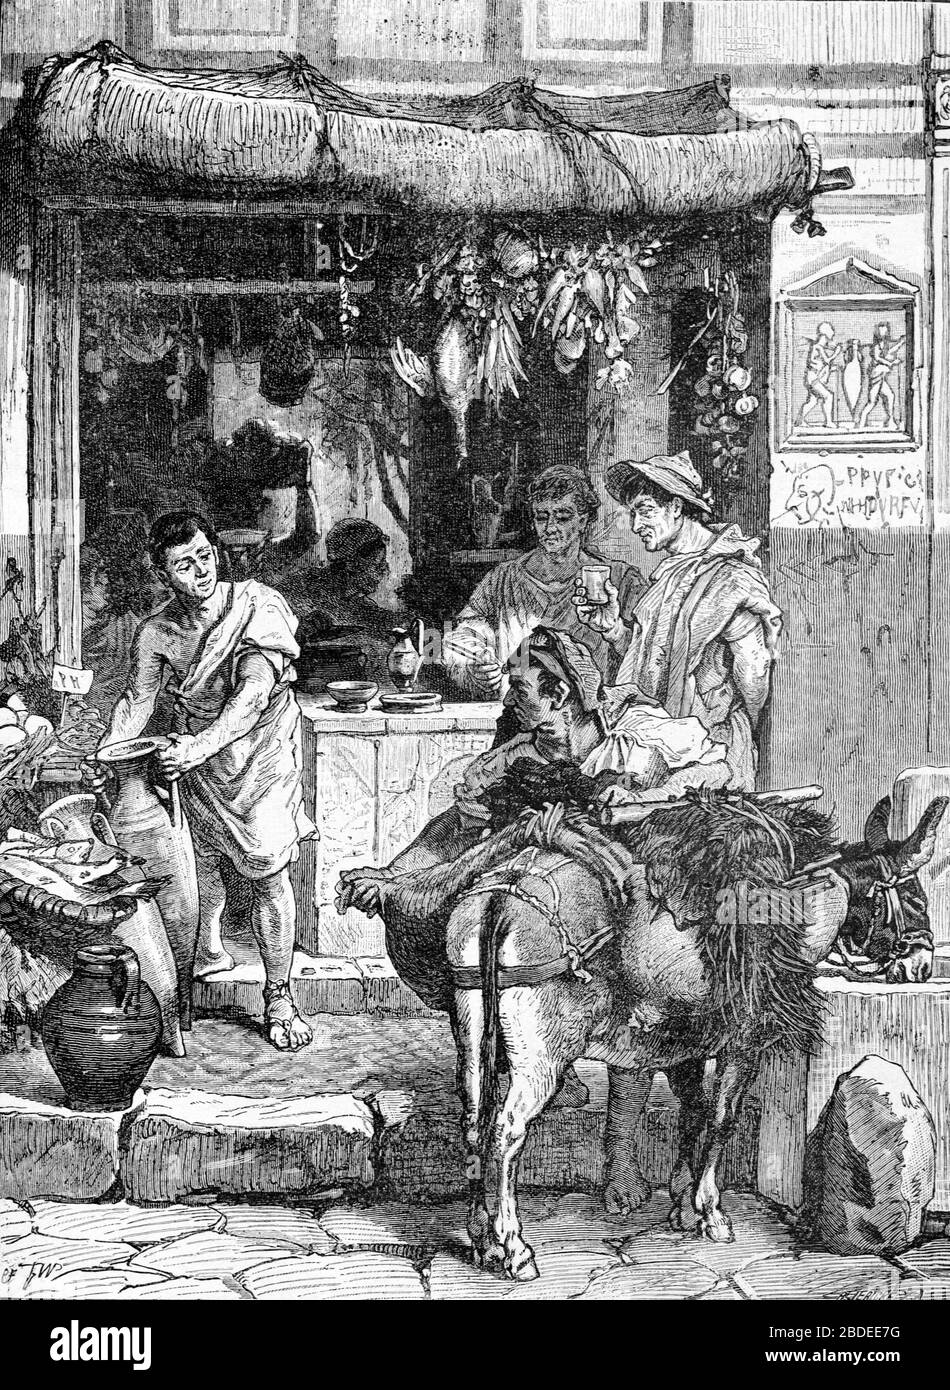 Auberge or Roadside Inn in Ancient Pompei Italy. Vintage or Old Illustration or Engraving 1887 Stock Photo